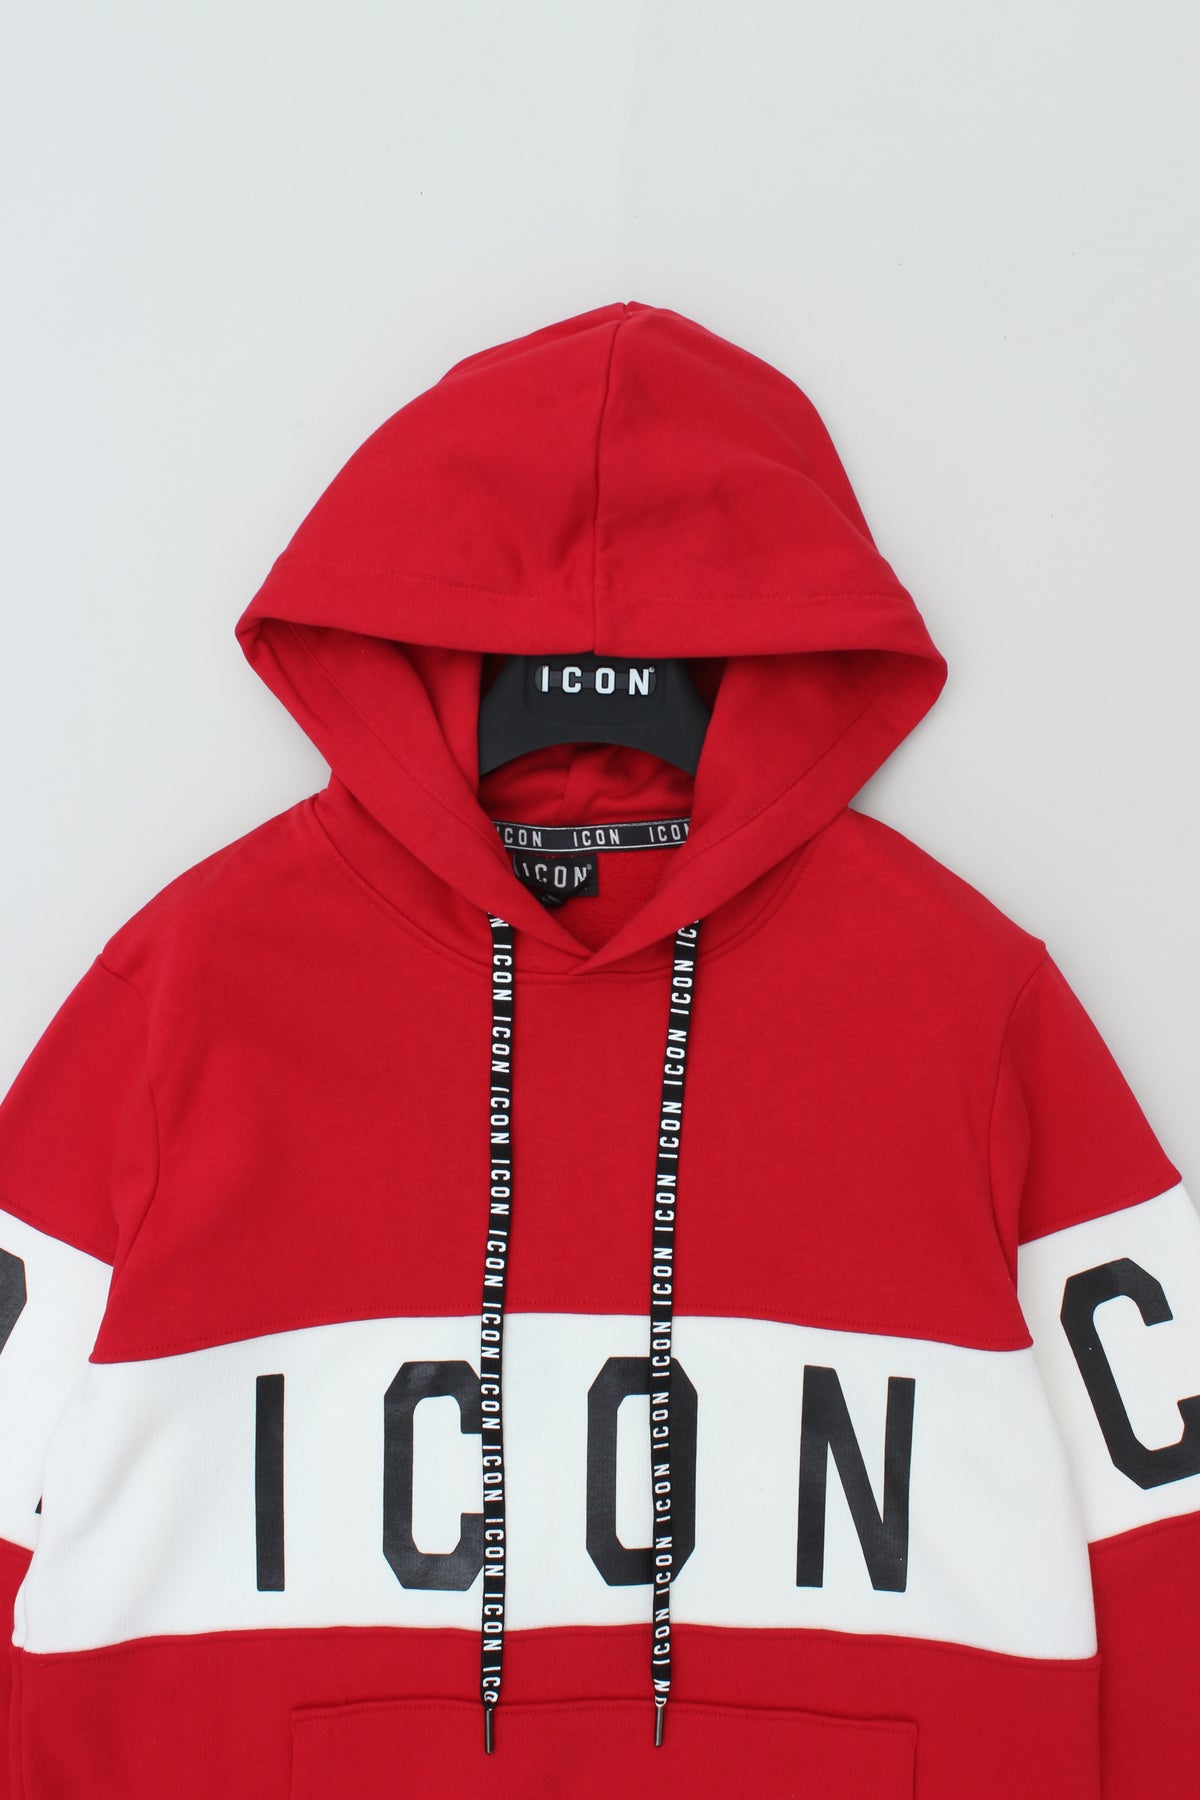 ICON Hoodie